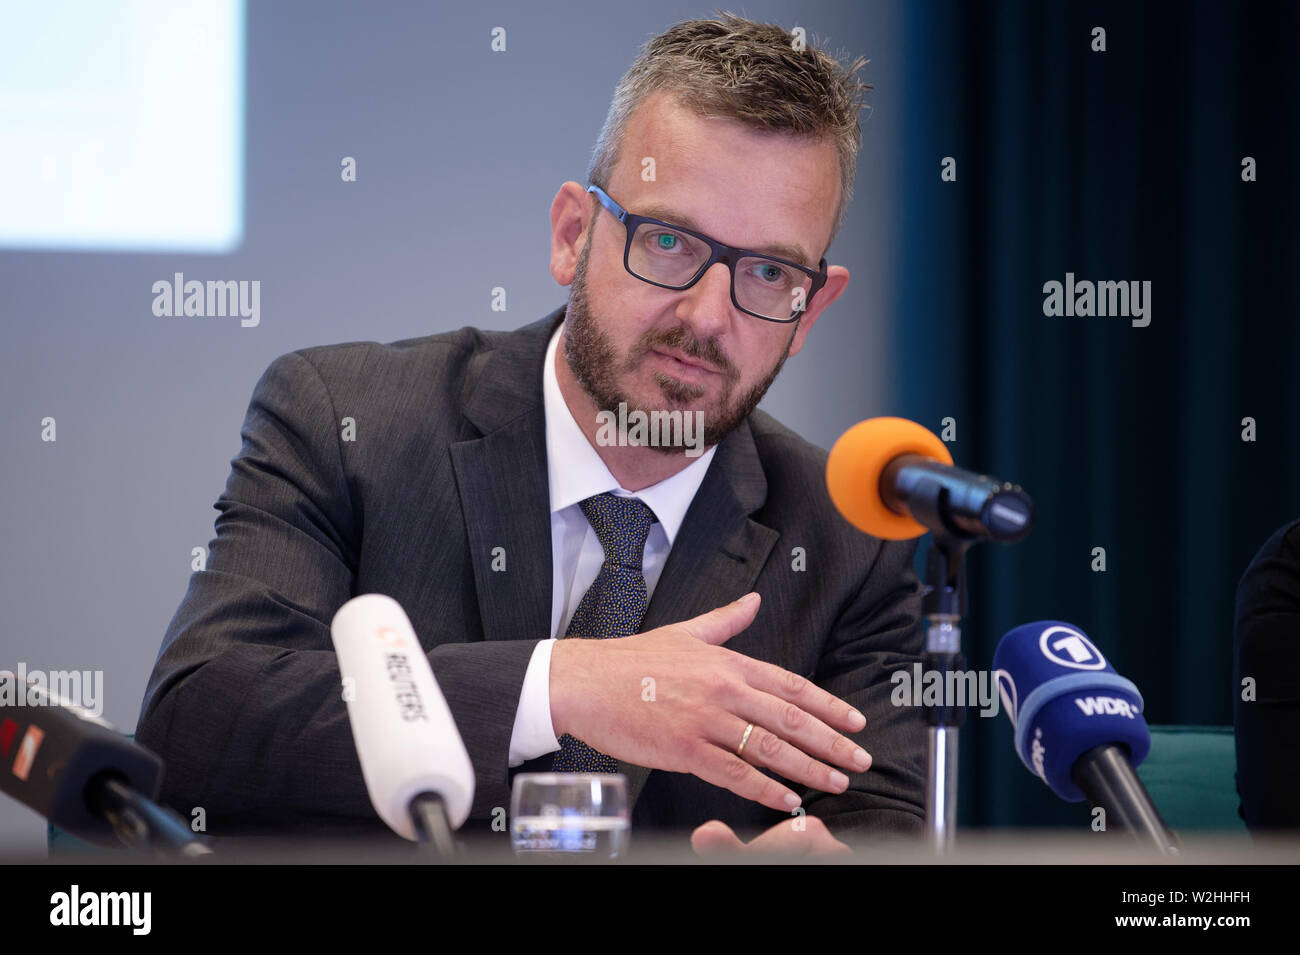 Cologne, Germany. 09th July, 2019. The head of the FIU, Christof Schulte, speaks at a press conference on the annual report of the Financial Intelligence Unit (FIU). The FIU is the anti-money laundering unit of the federal government. Credit: Henning Kaiser/dpa/Alamy Live News Stock Photo